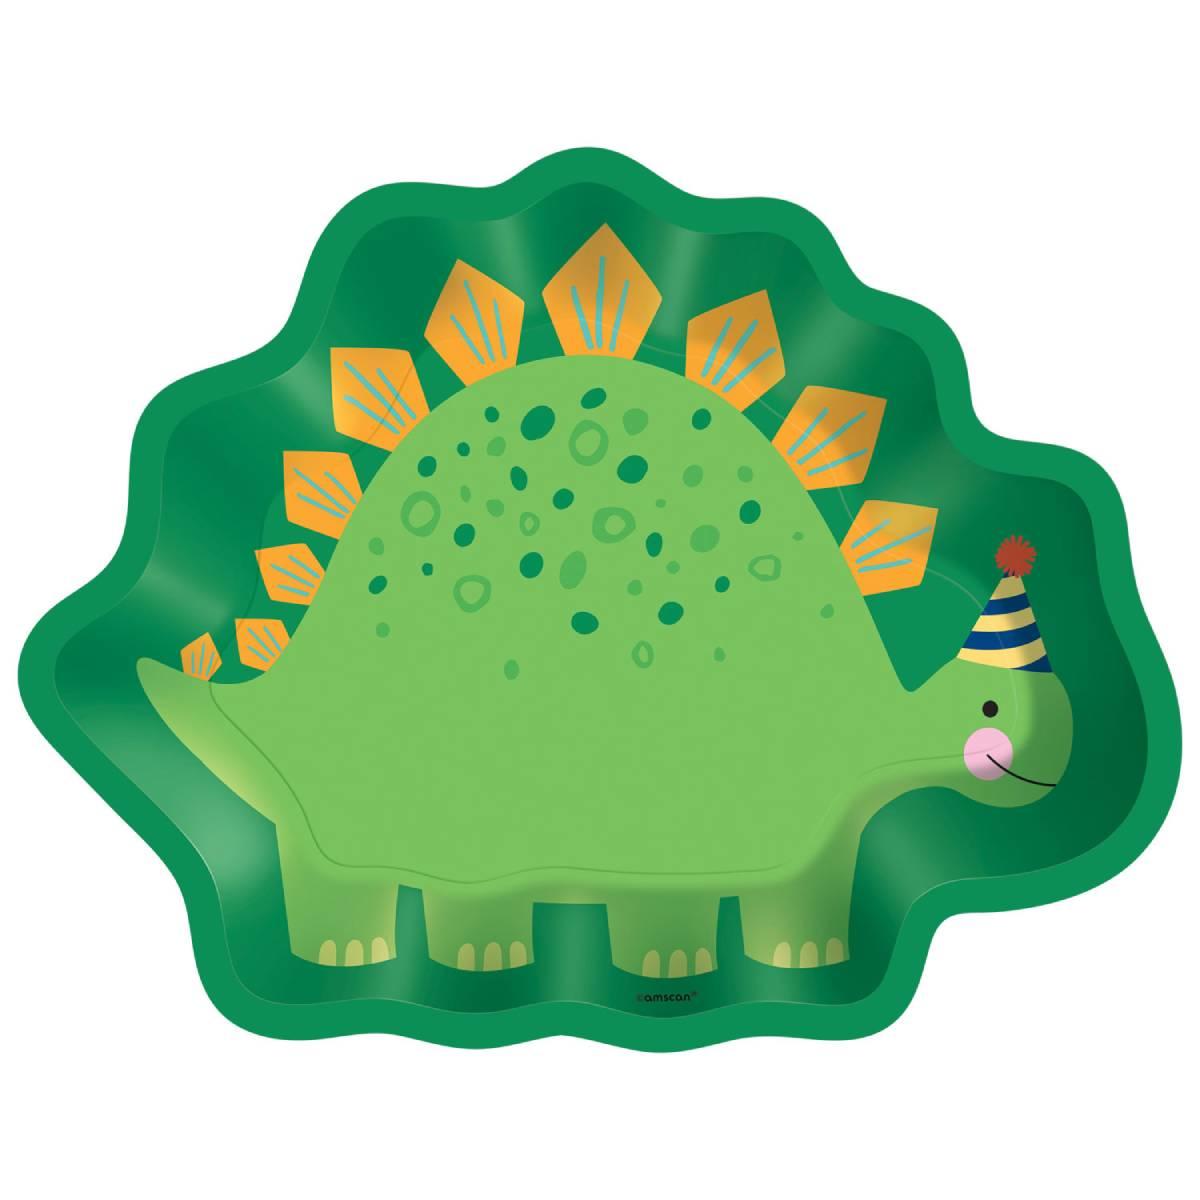 Dino-Mite Shaped Party Paper Plates 23cm by 17cm by Amscan 5572270 available here at Karnival Costumes online party shop